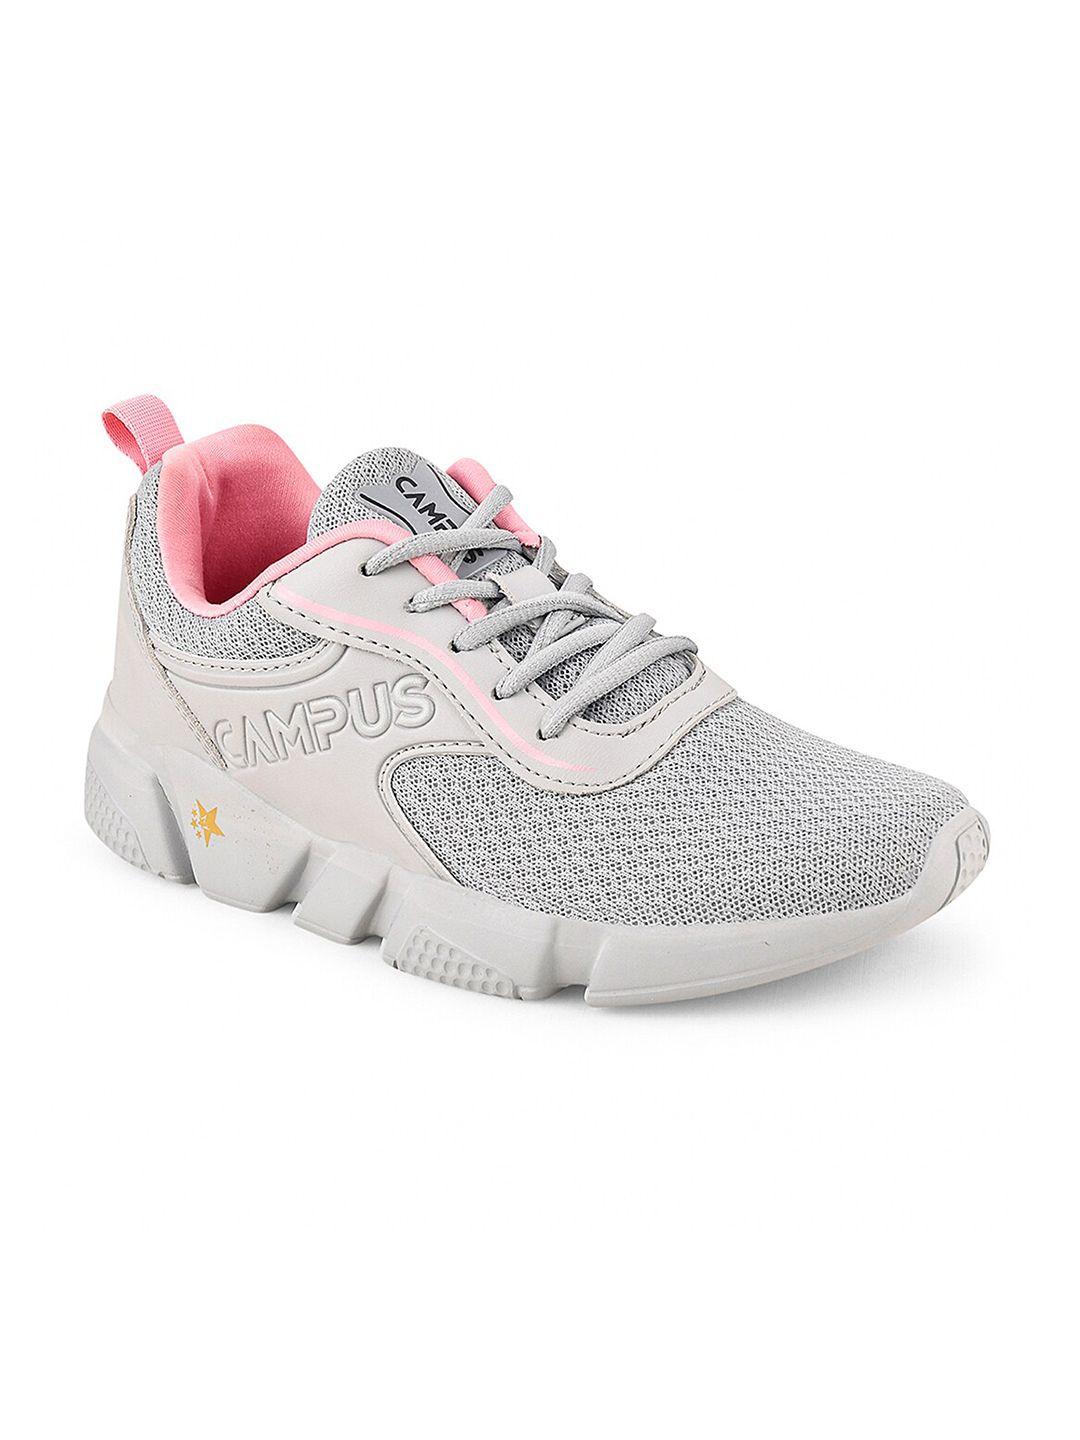 campus-women-camp-flor-non-marking-running-sports-shoes